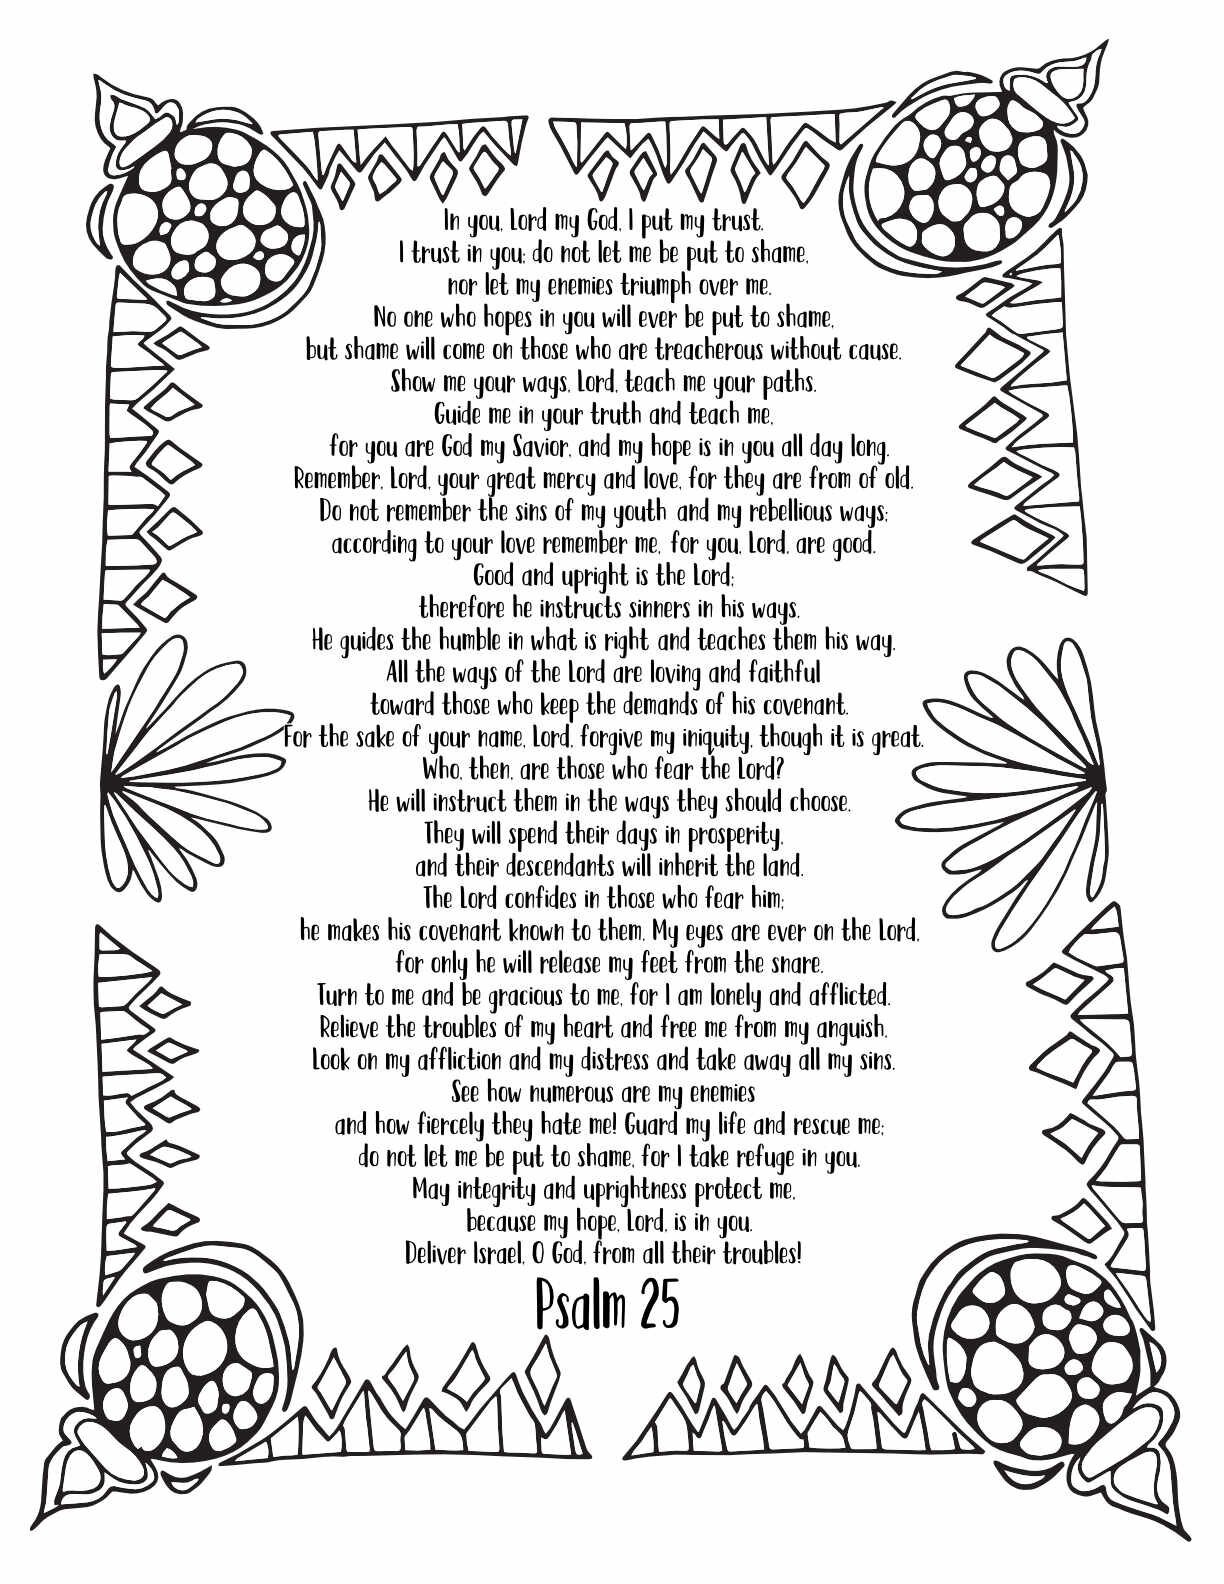 10 Free Printable Psalm Coloring Pages - Download and Color Adult Scripture - Psalm 25CLICK HERE TO DOWNLOAD THIS PAGE FREE